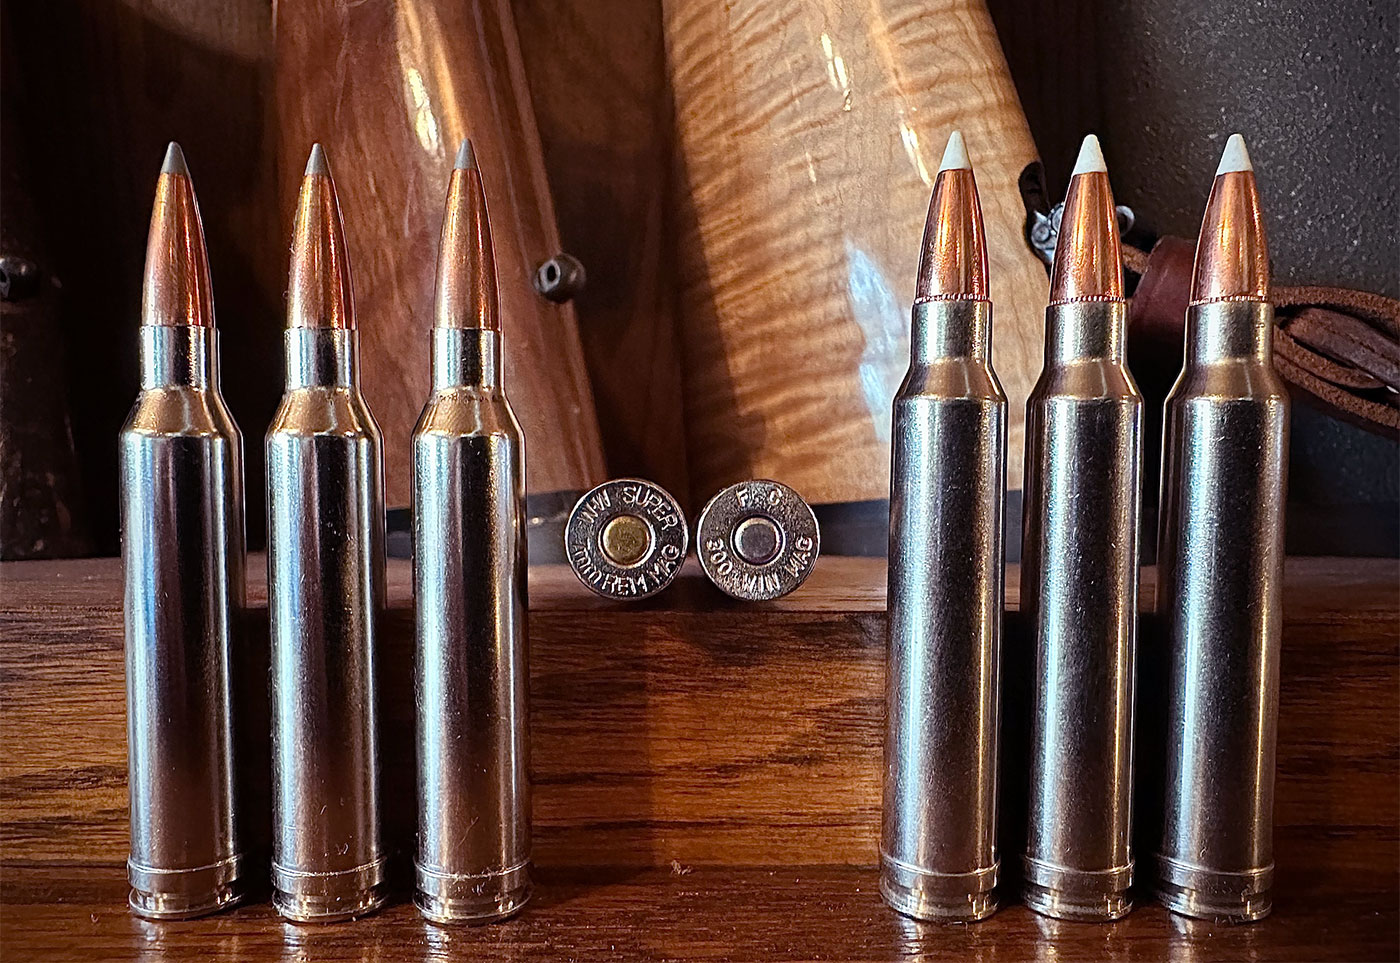 7mm Rem Mag vs .300 Win Mag: A Battle of Two Iconic Magnums